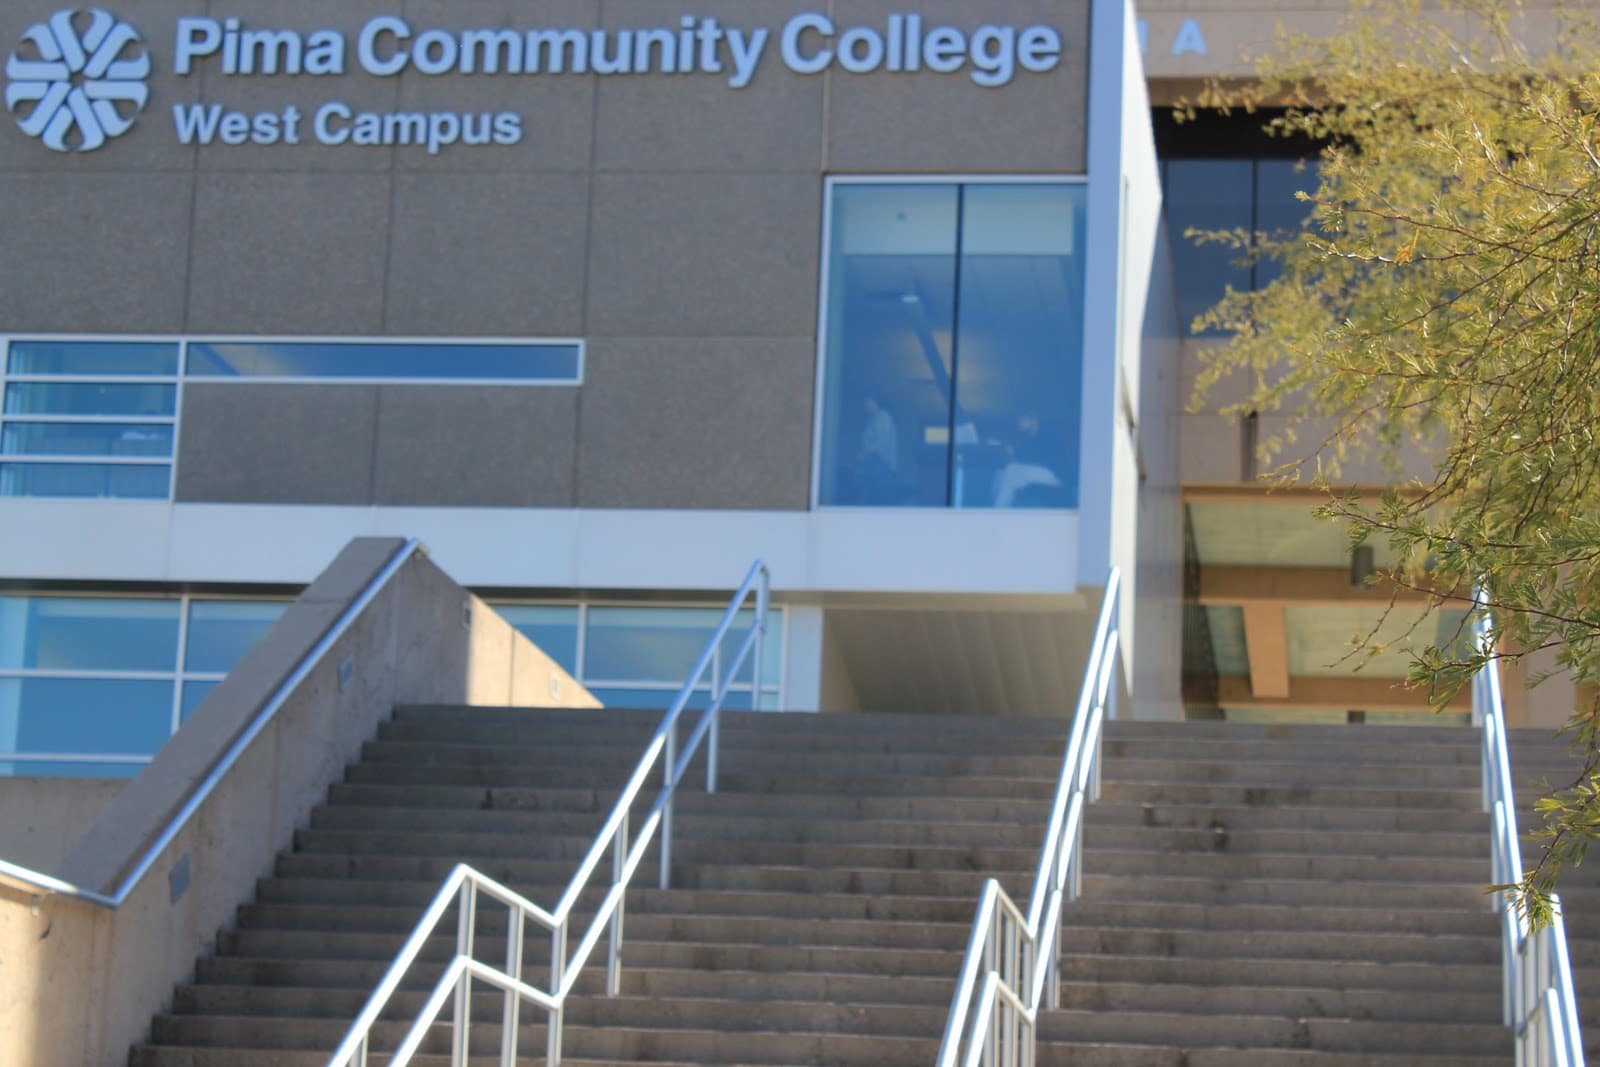 Pima Community College Student Reviews, Scholarships, and Details